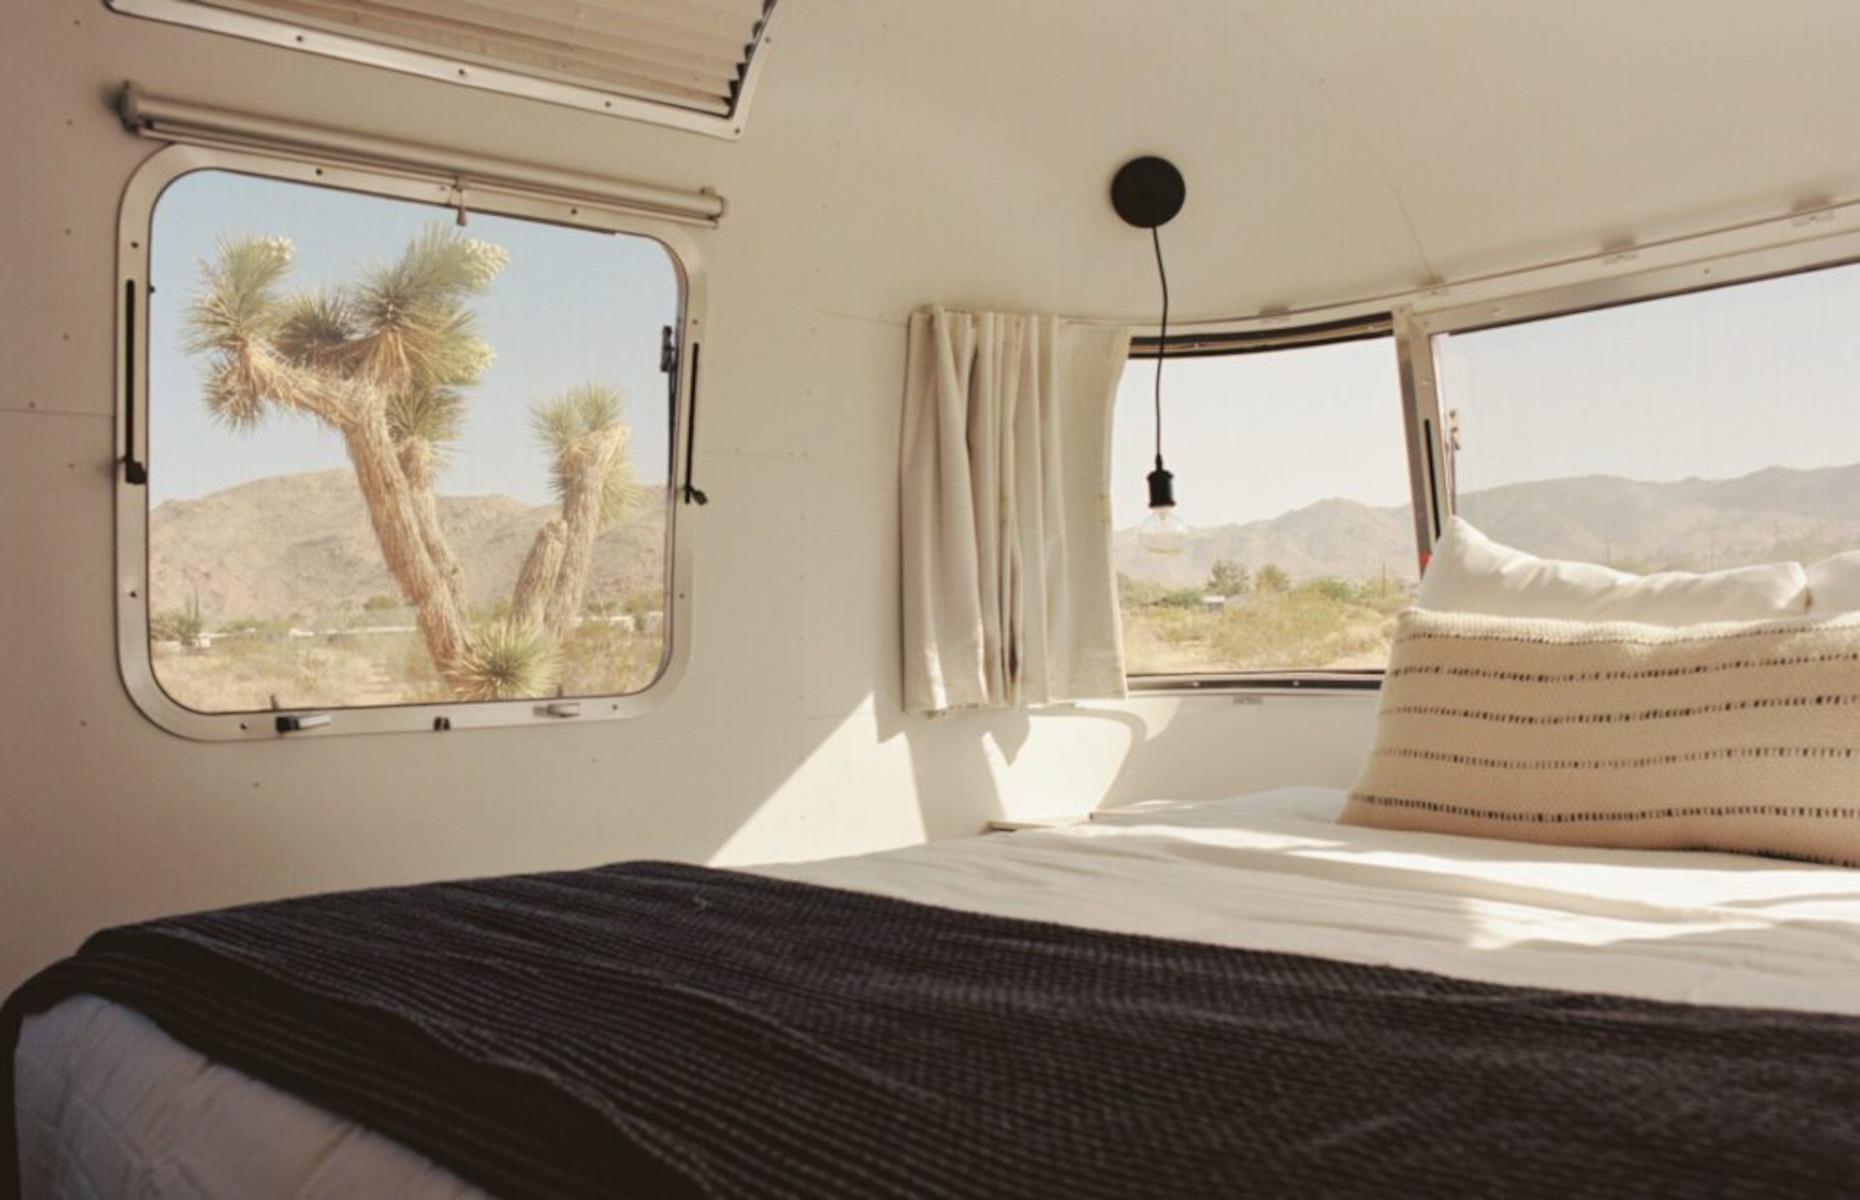 <p>Each spacious 31-foot Airstream can sleep up to three adults, or two adults and two children, and boasts a fully functional kitchenette and a comfortable seating area.</p>  <p>There's also a stylish and surprisingly spacious bathroom with a walk-in rain shower for the ultimate glamping experience. </p>